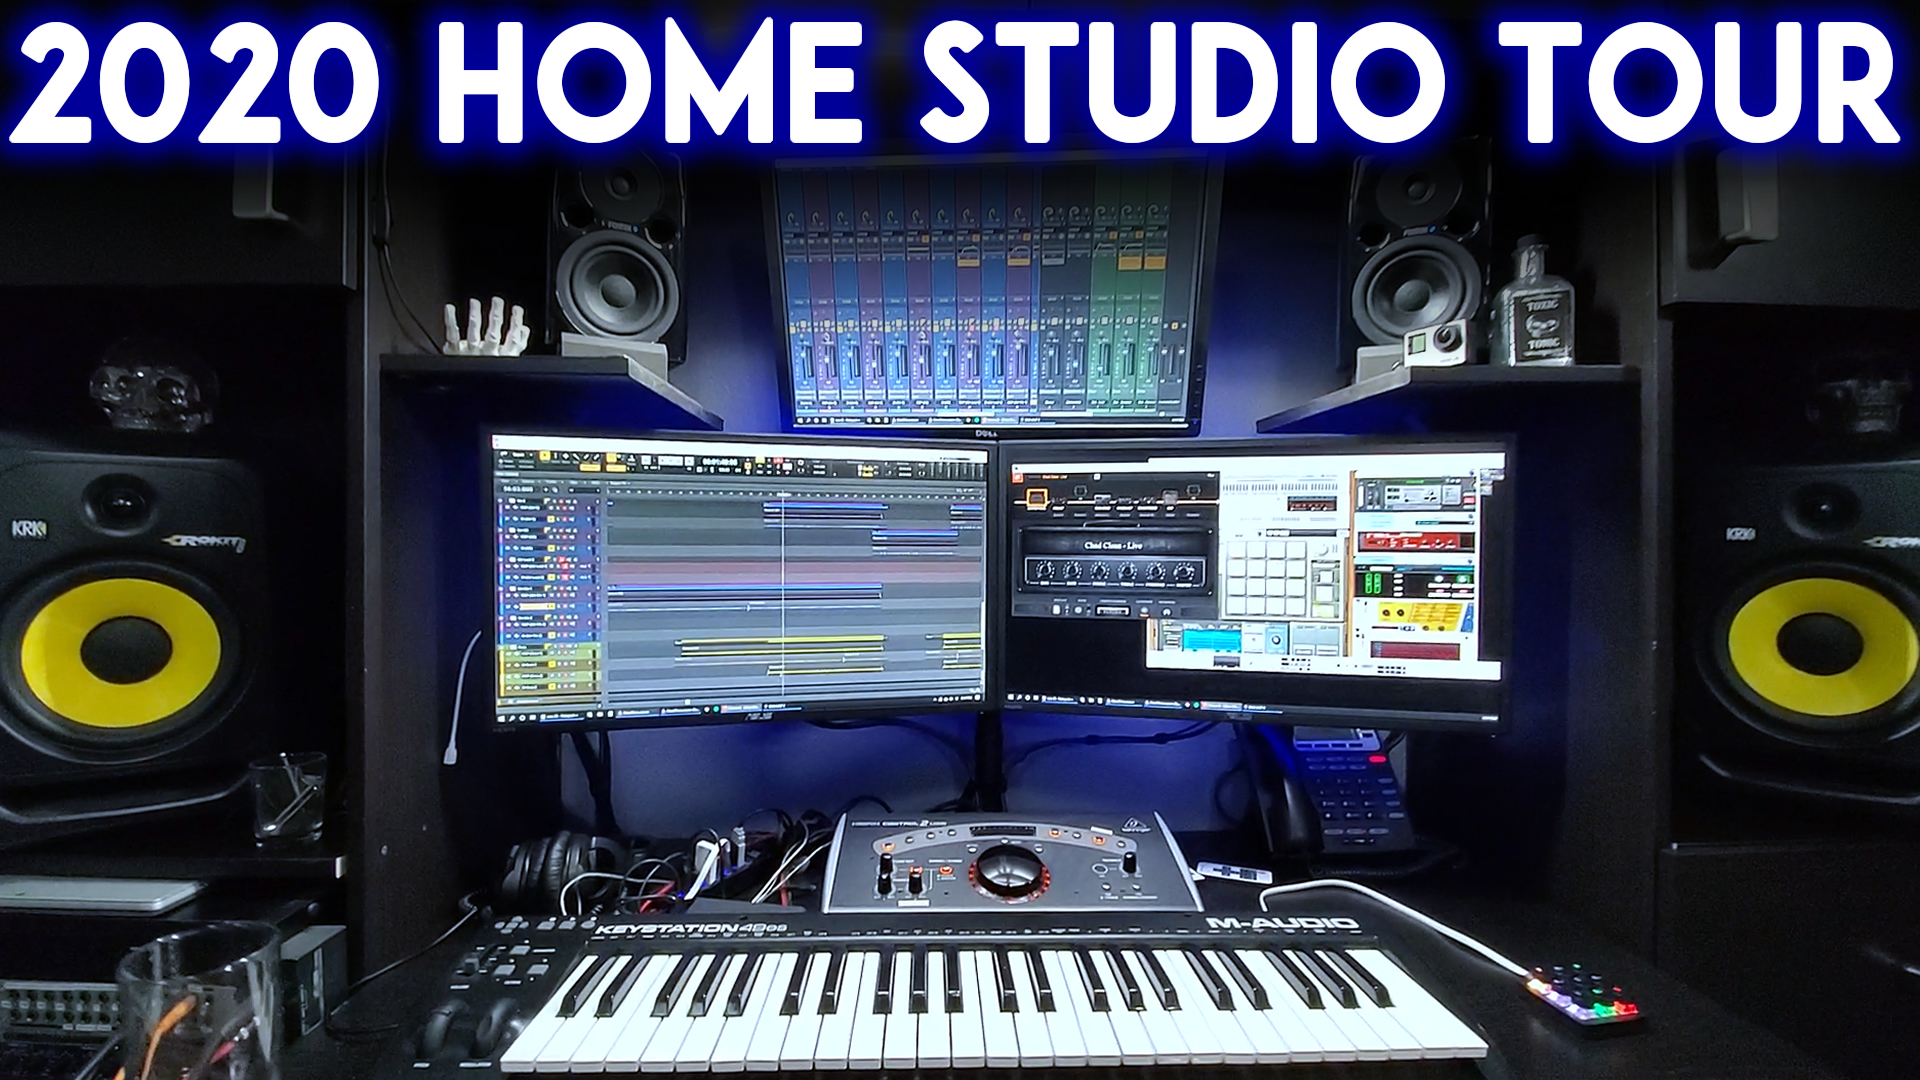 Home Studio Tour (2020) With Sound Booth